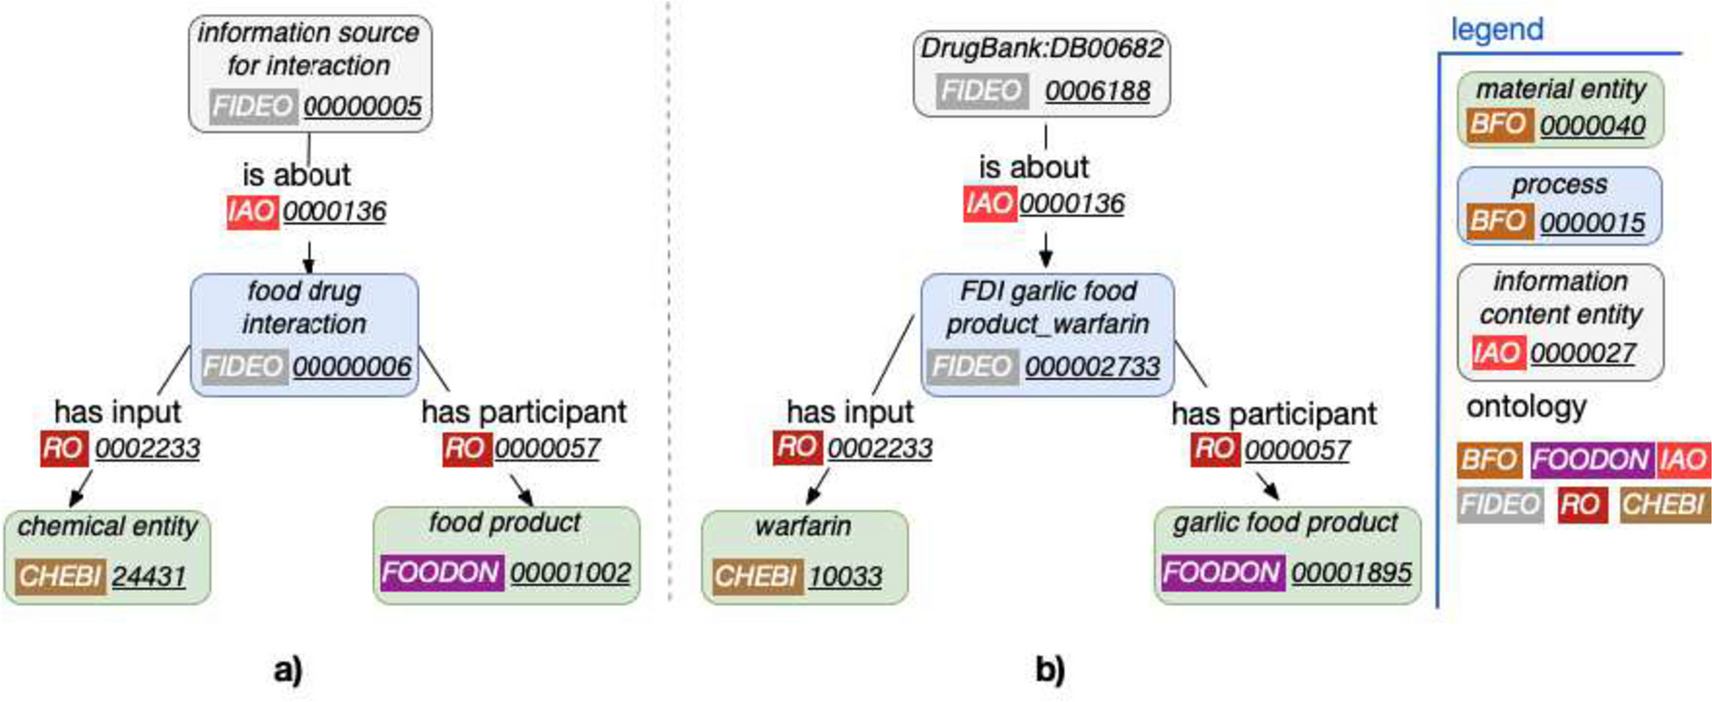 Enriching the FIDEO ontology with food-drug interactions from online knowledge sources